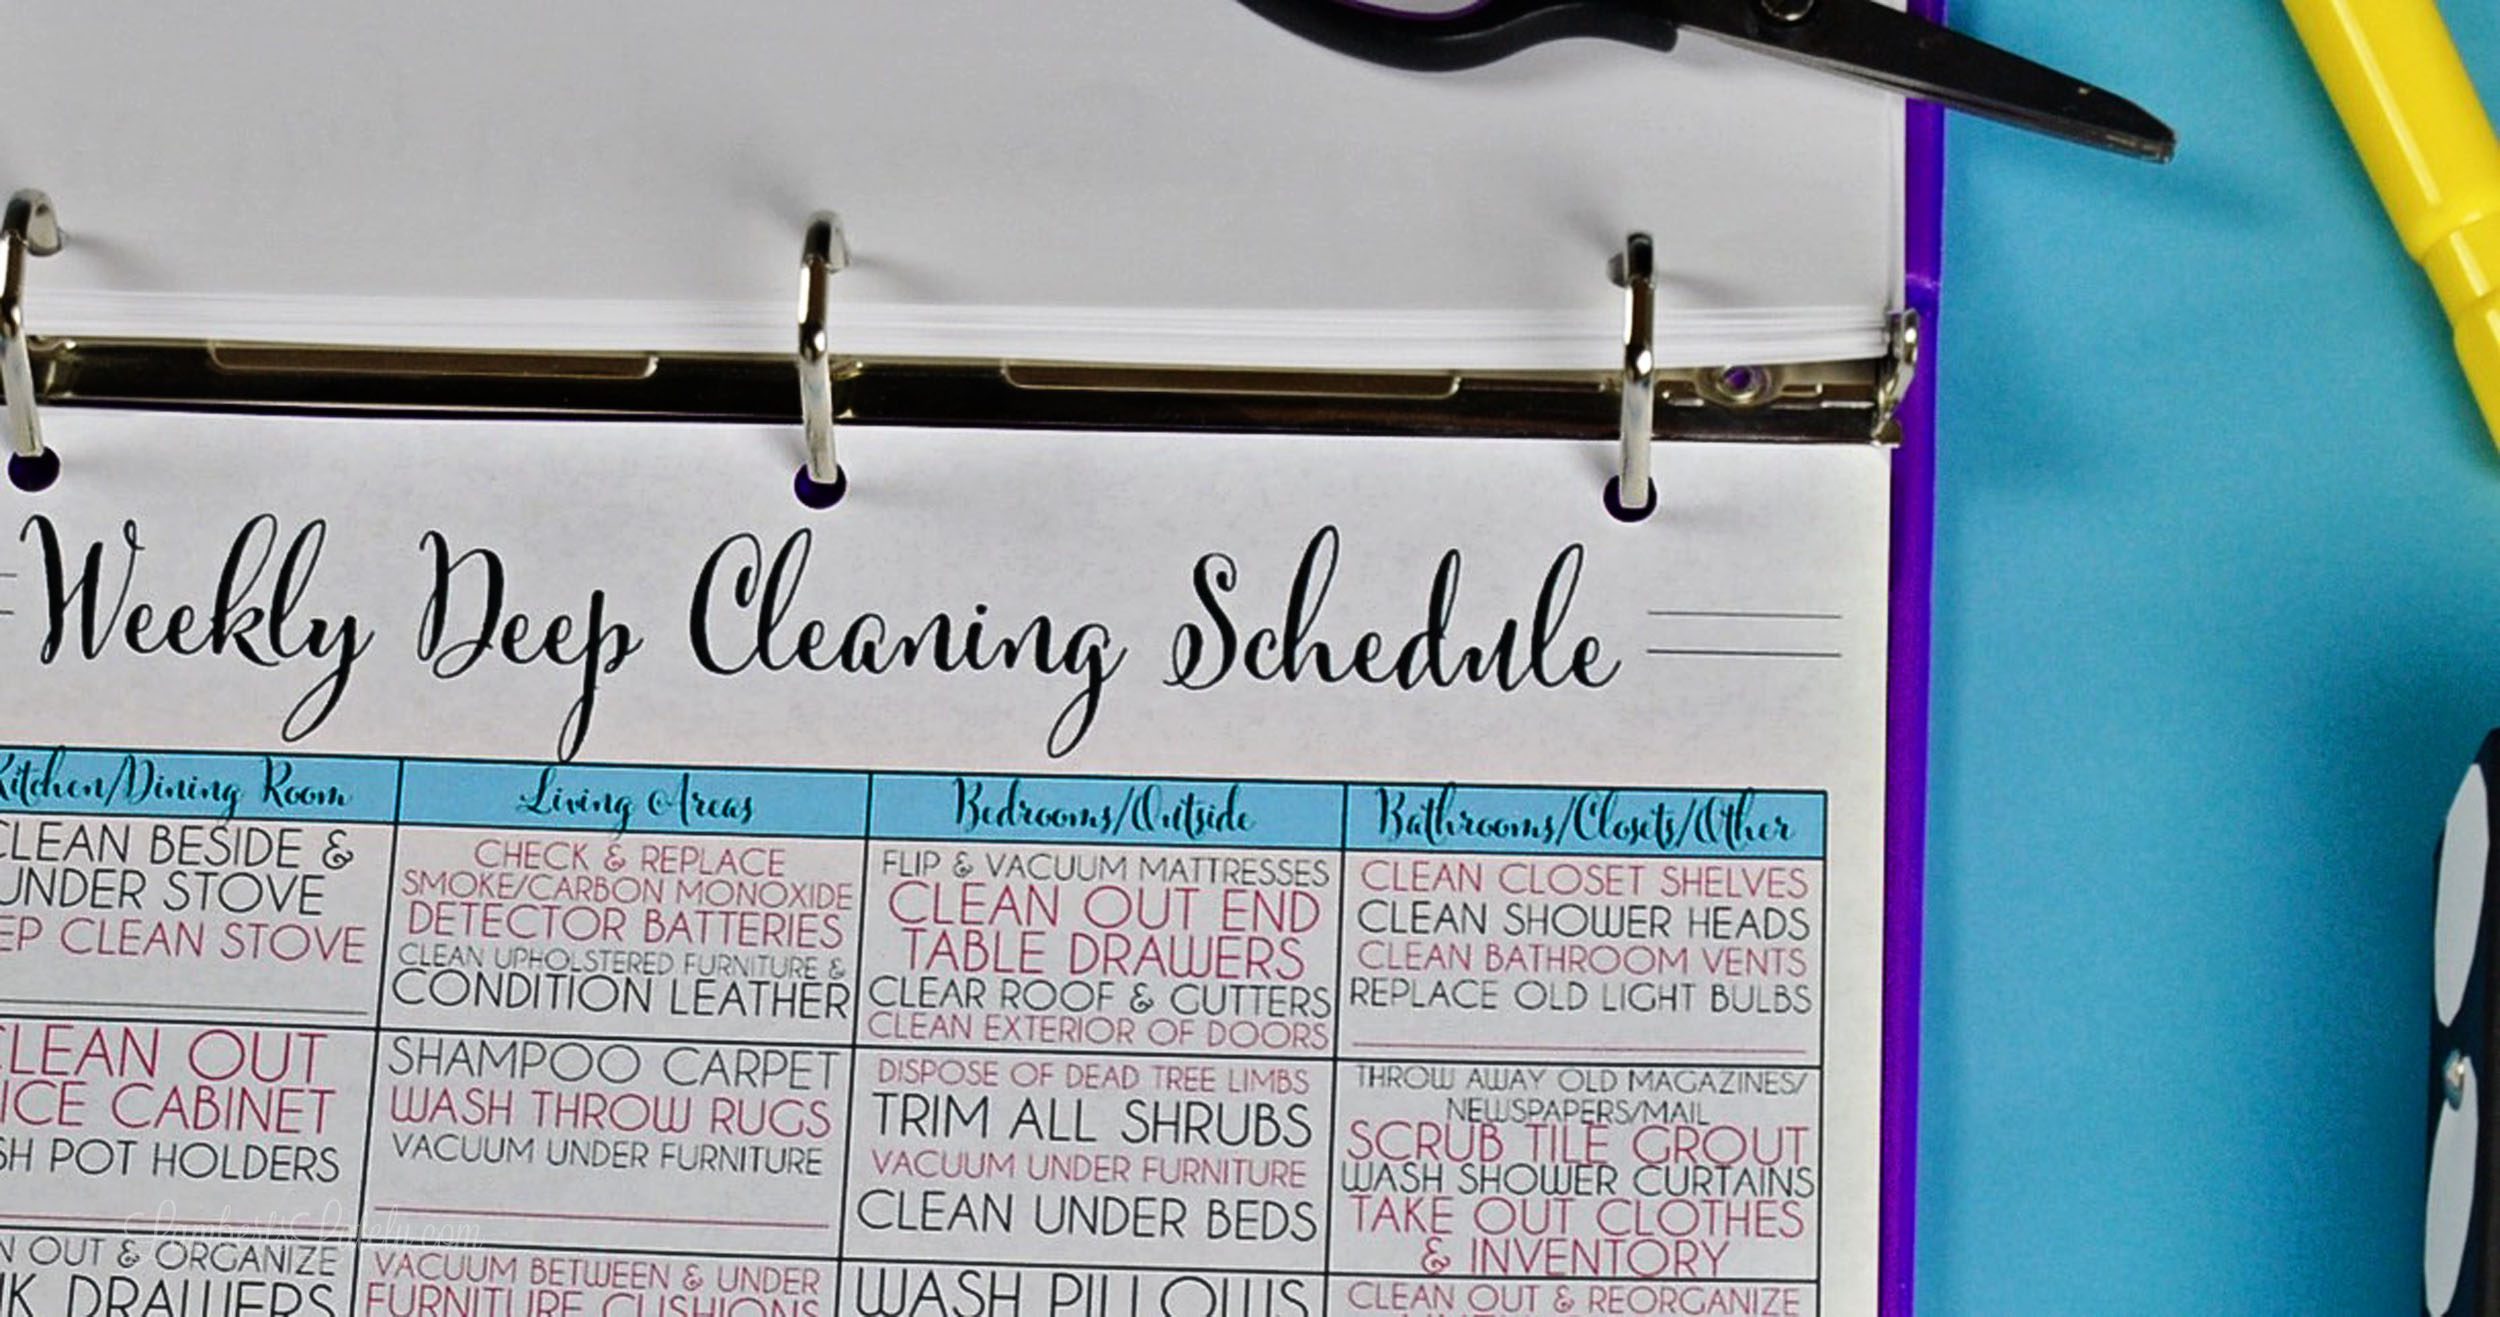 Deep cleaning schedule